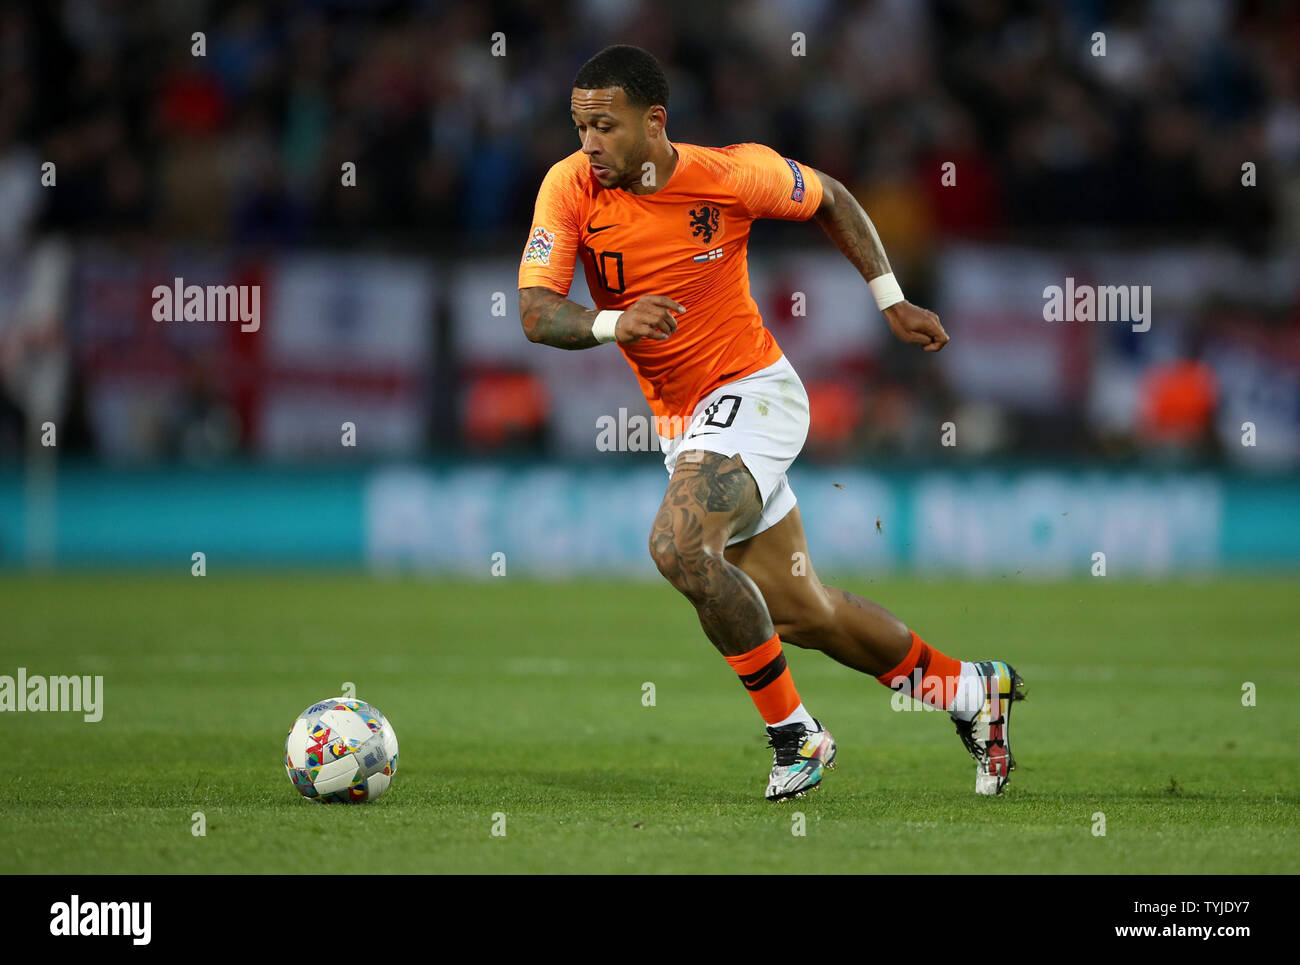 I love football — (Memphis Depay liked the pic)